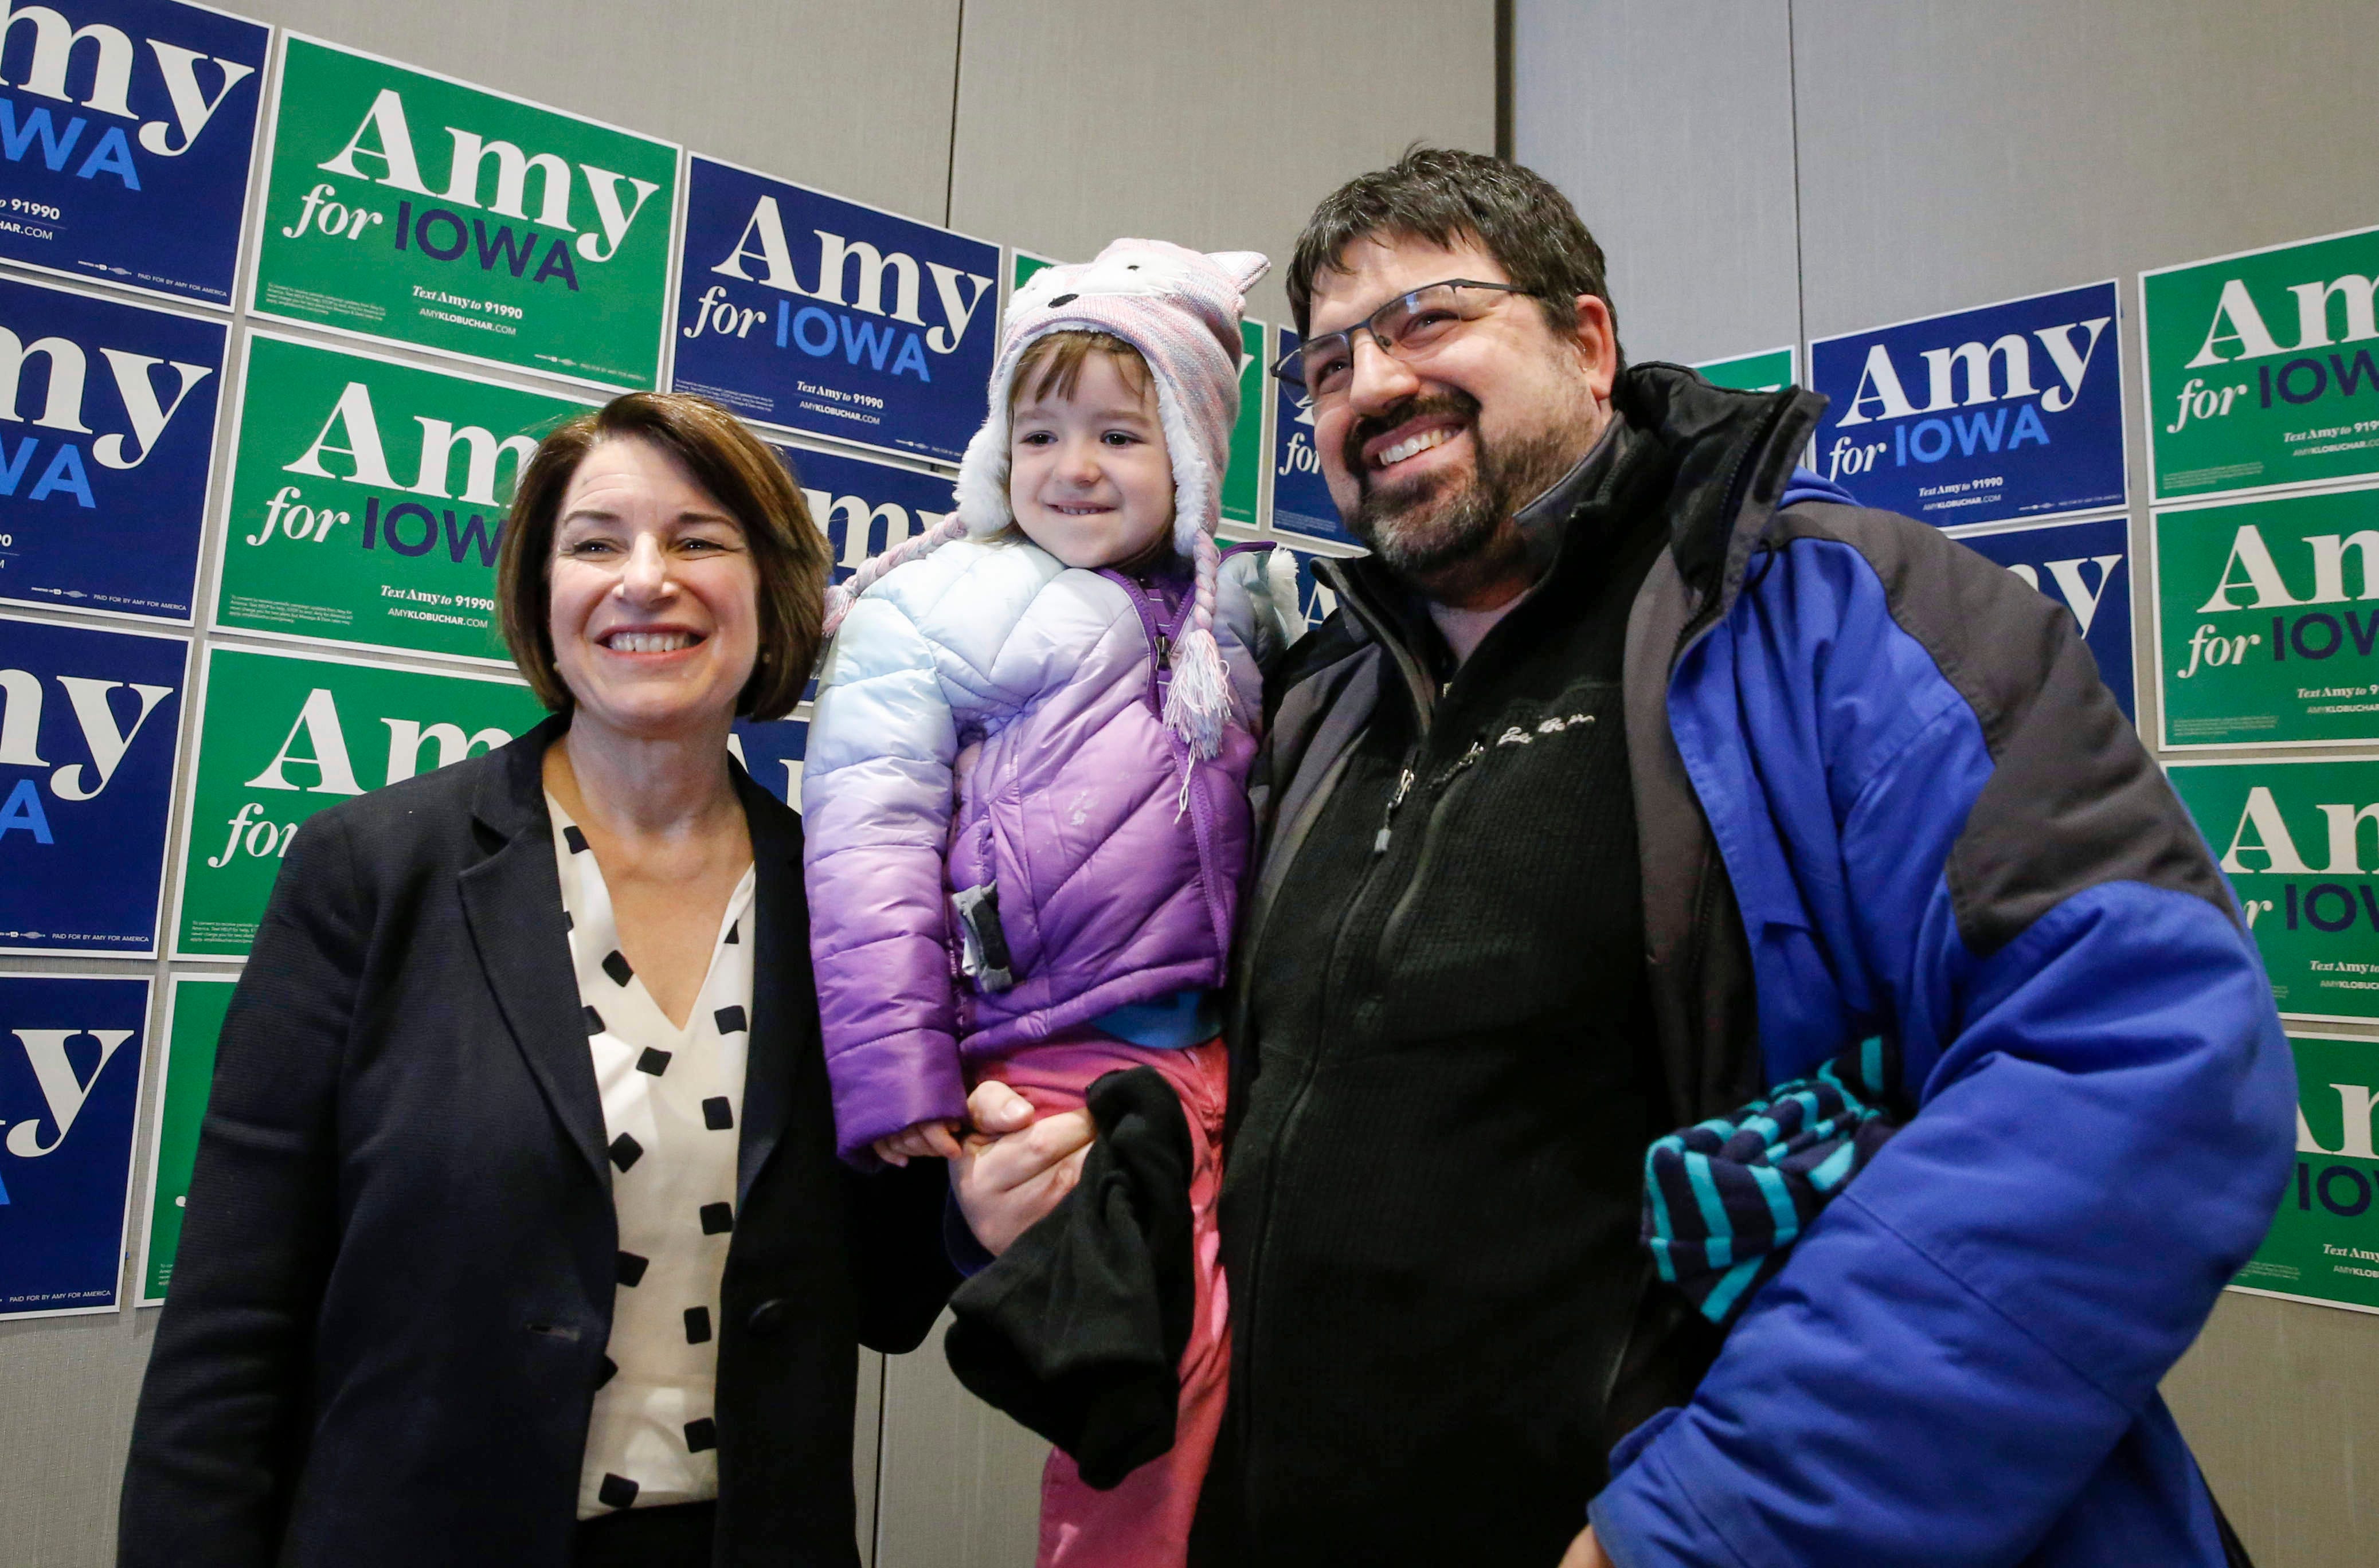 BRYON 1:29 p.m., Coralville -- U.S. Sen. Amy Klobuchar poses for a photo with Adam Schwalje and his four-year-old daughter, Clara, of Coralville after Amy spoke to a crowded room of supporters at the Marriott Hotel in Coralville.